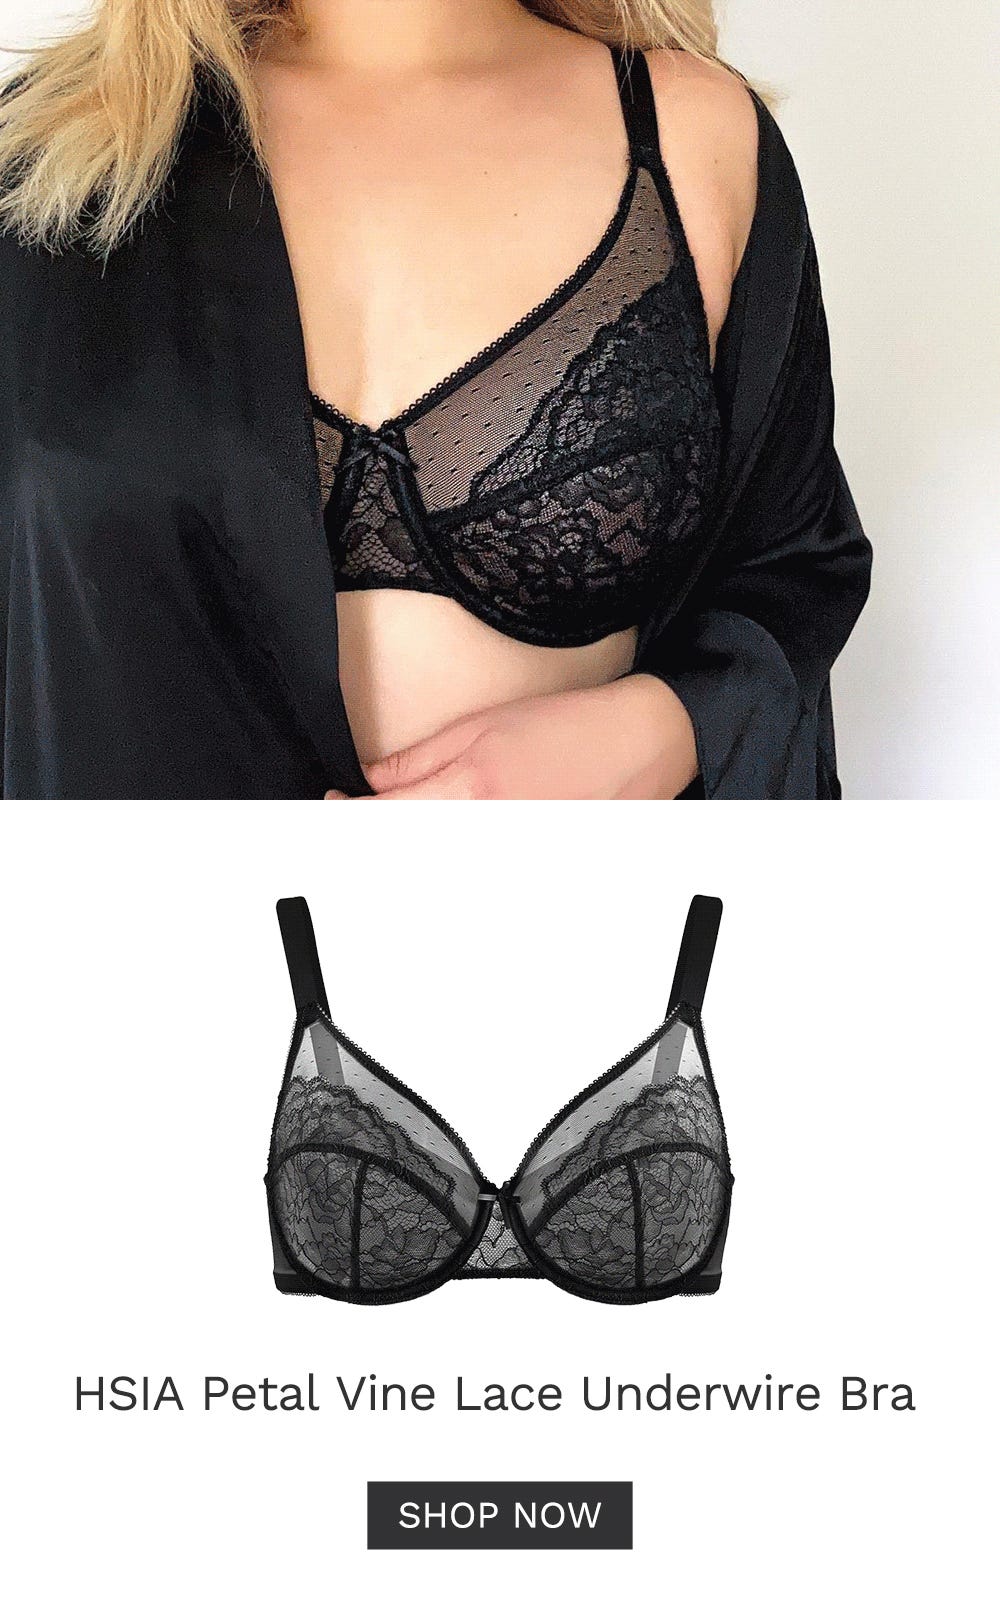 Bra Etiquette: Choosing the Right Bra for Every Occasion